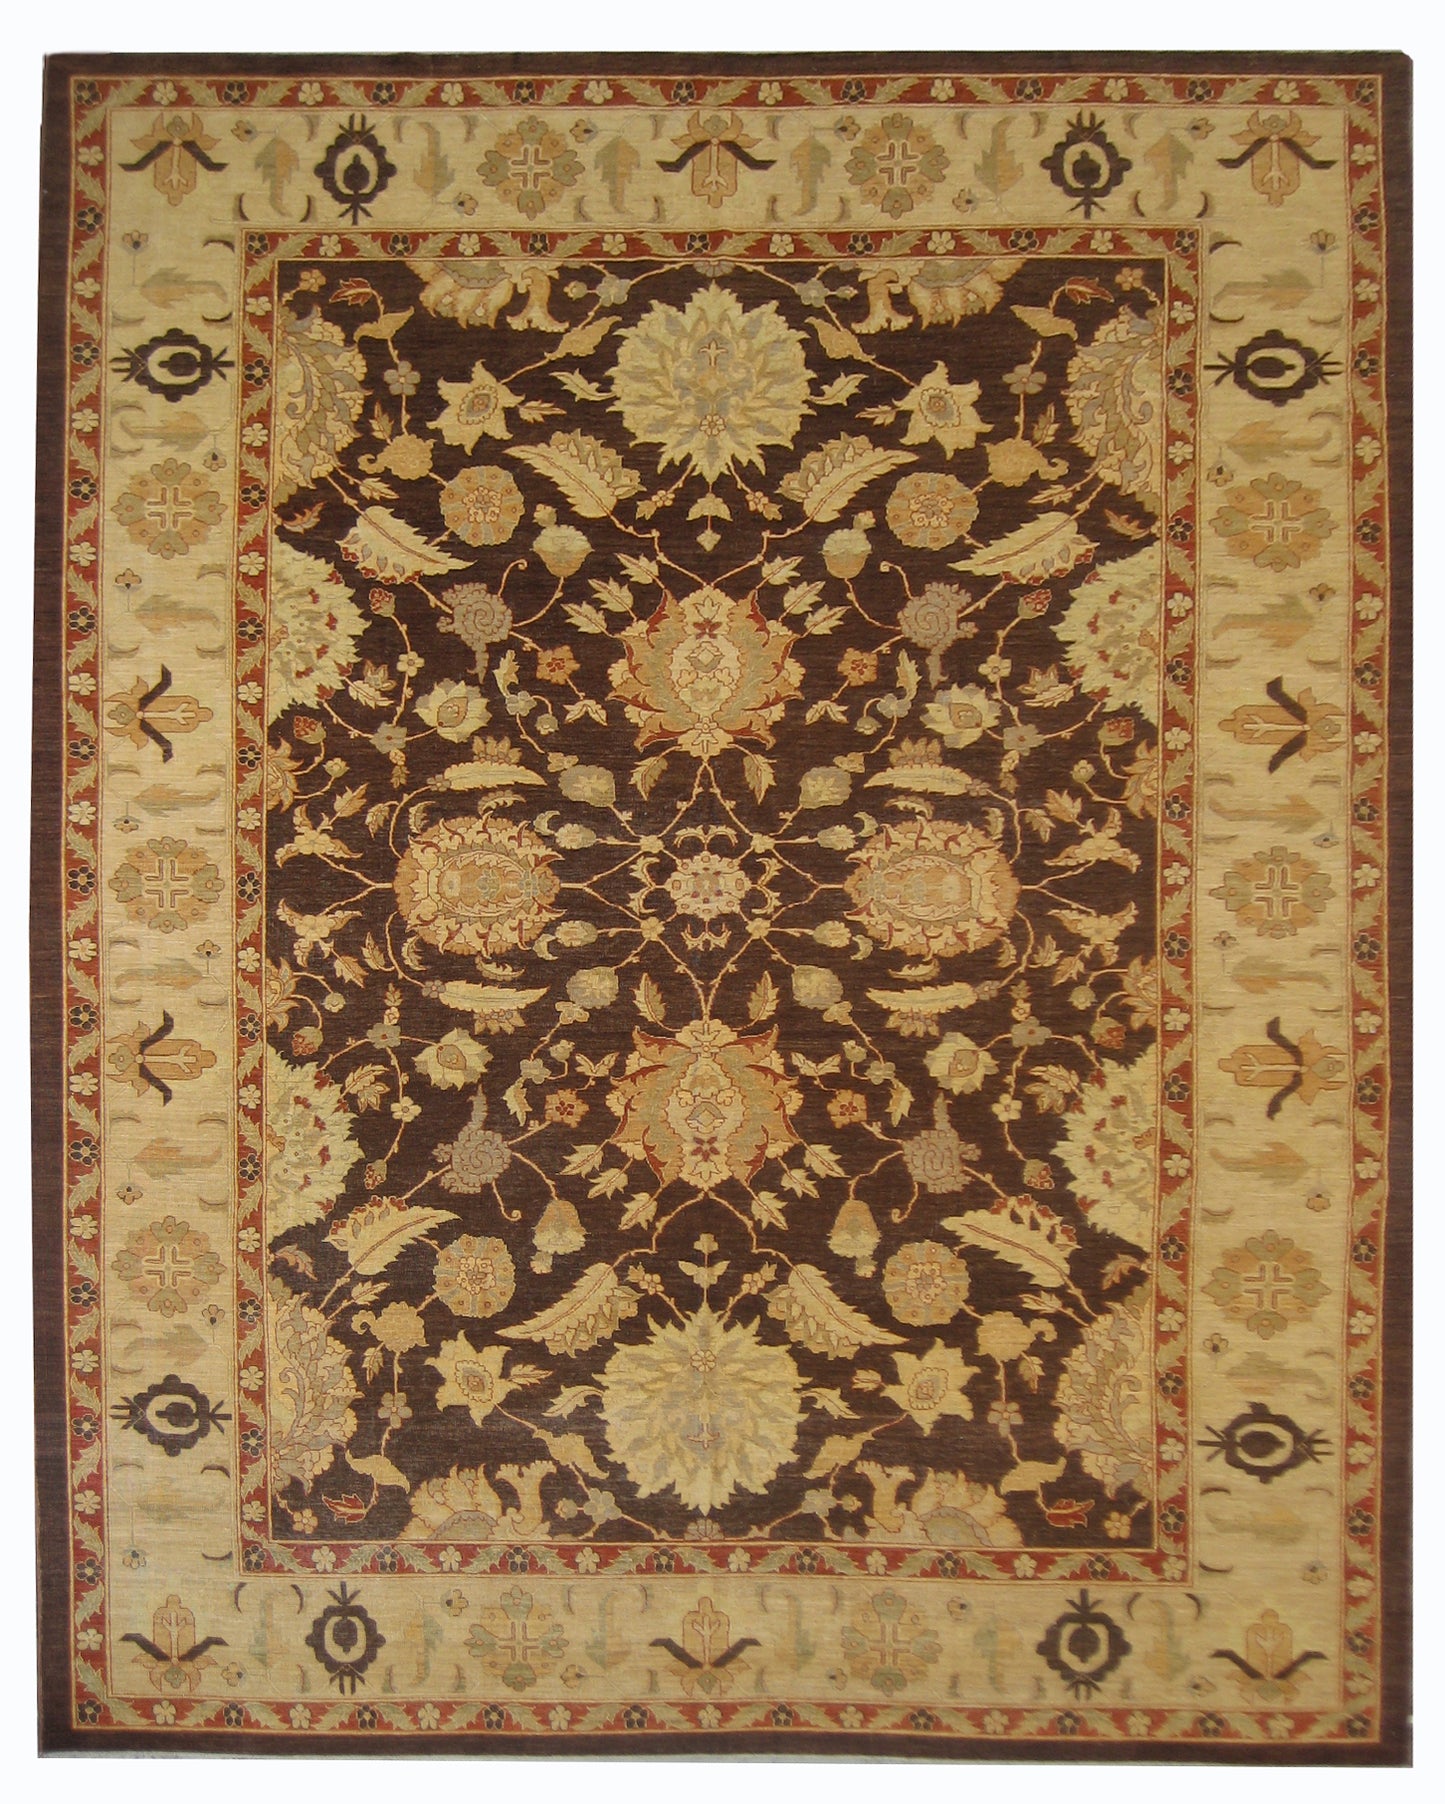 10'x14'Ariana Traditional Floral Design Rug